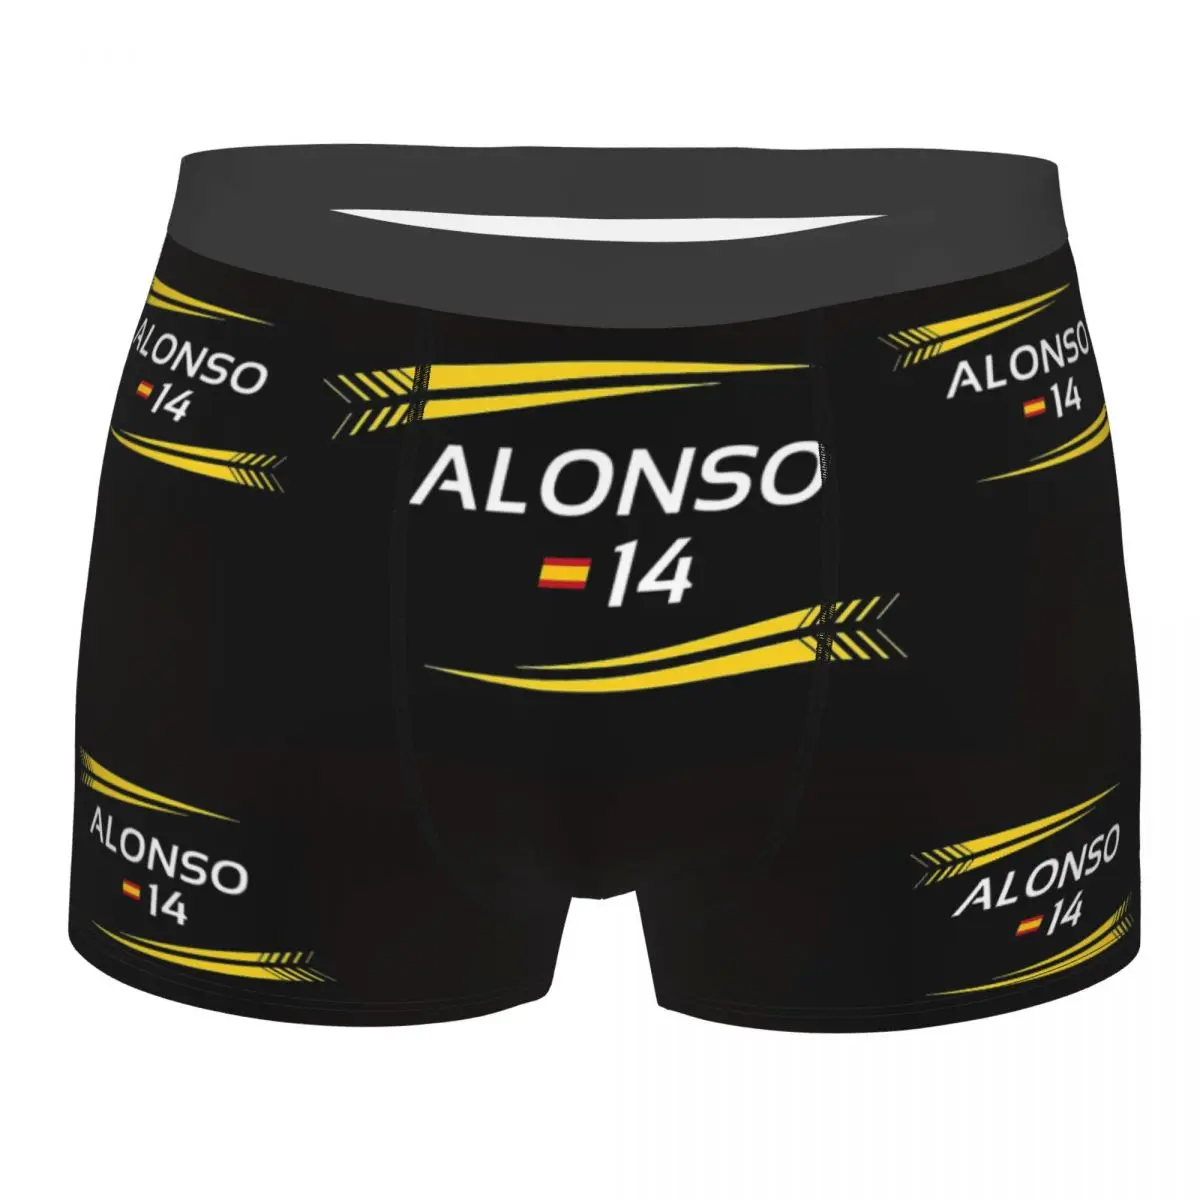 F1 2021 - 14 Alonso Black Version Classic Men Boxer Briefs Underpants Highly Breathable High Quality Gift Idea small talk stickers vintage sticker book idea 4 3 x7 6inch sheet size 406 stickers black white